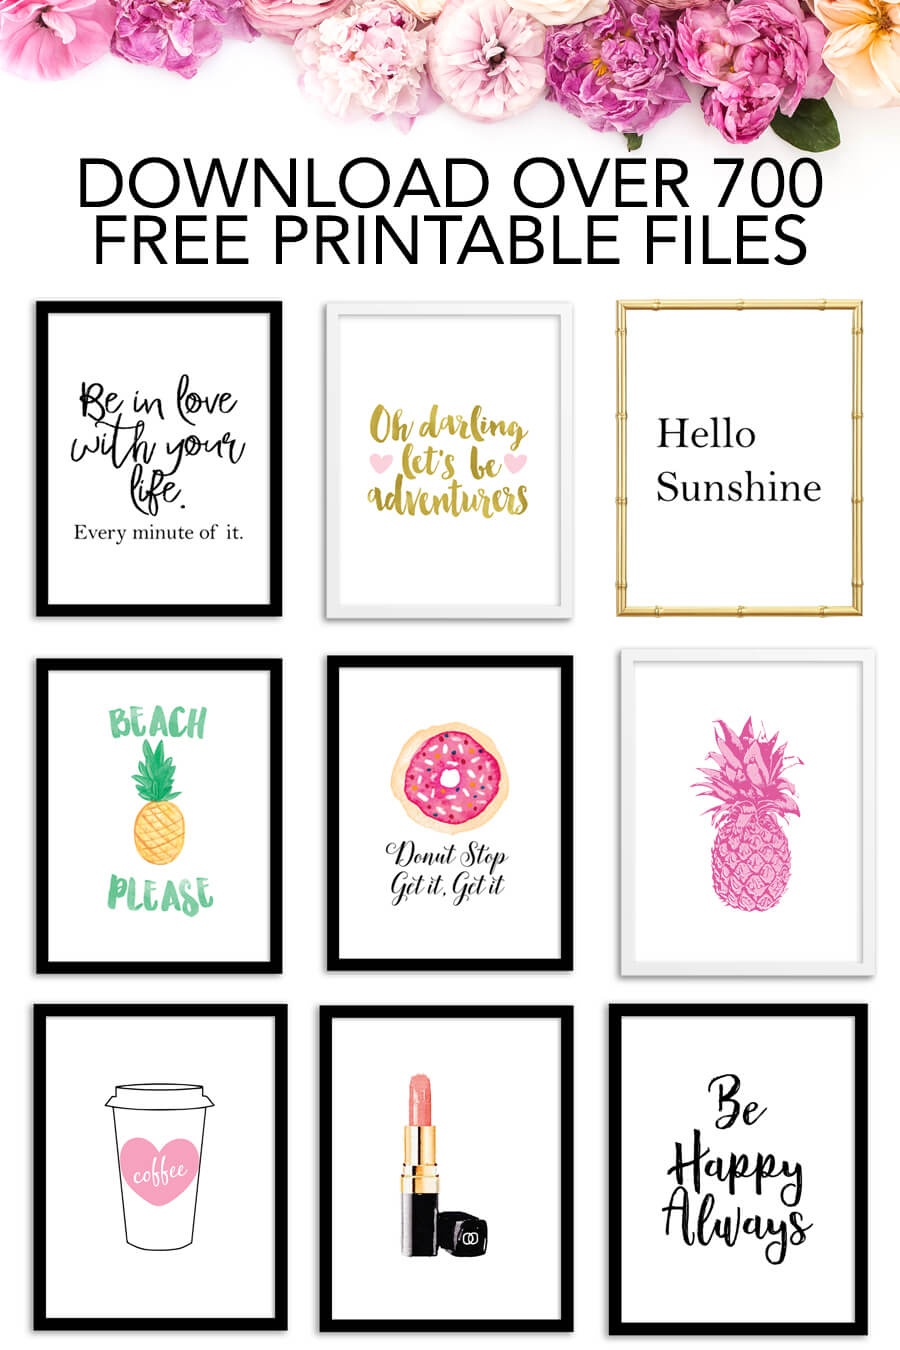 Free Printables - Download Over 700 Free Printable Files! - Chicfetti - Free Printable Pictures